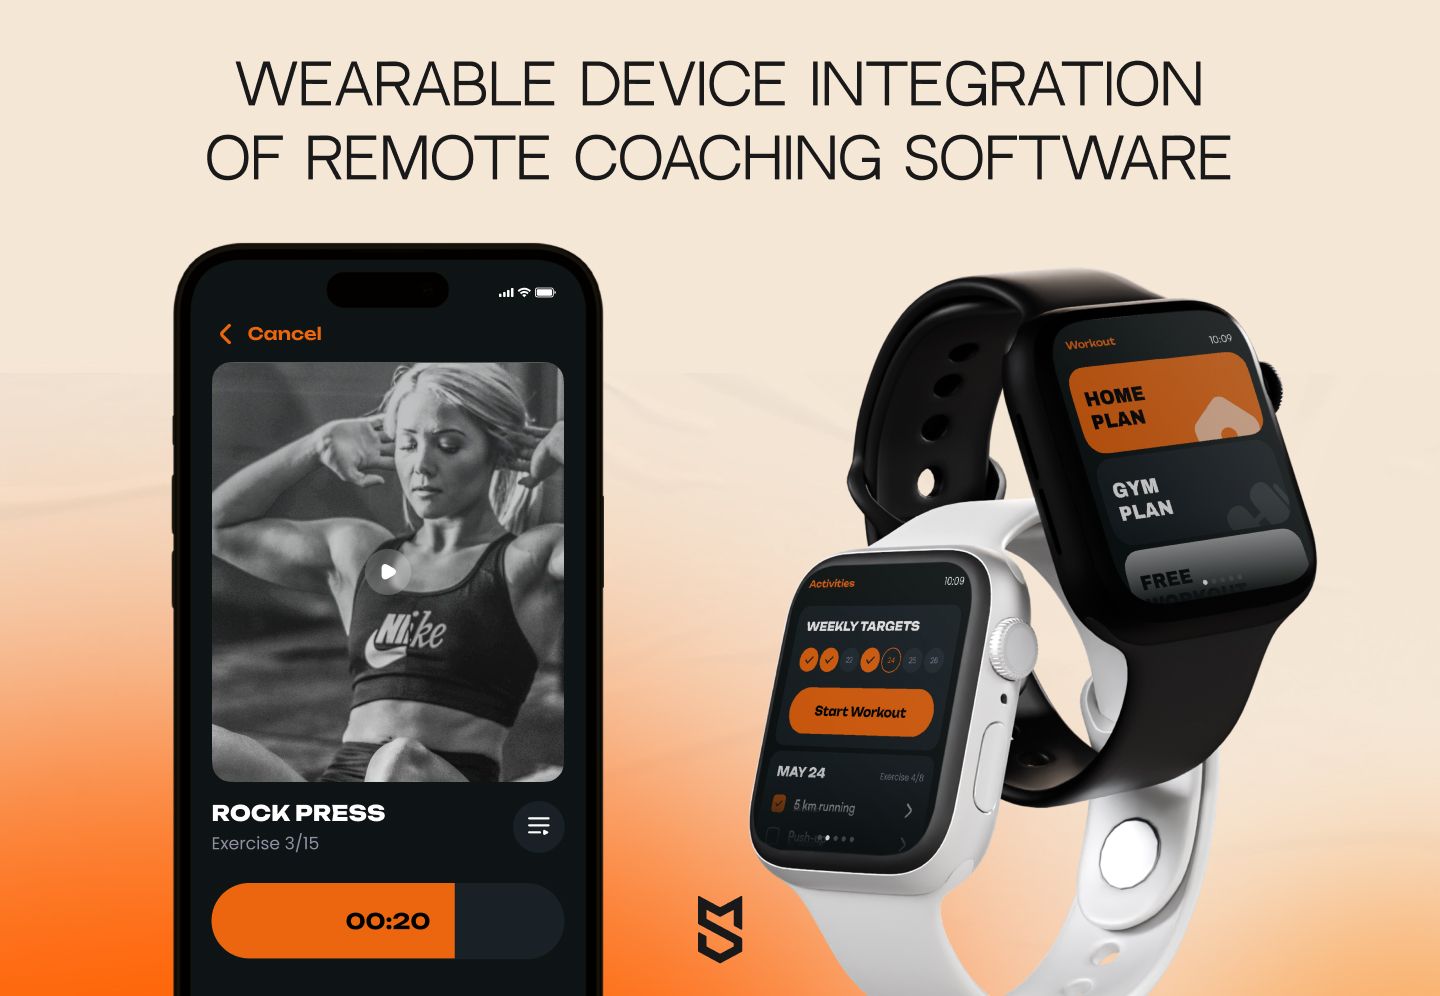 wearable device integration of remote coaching software